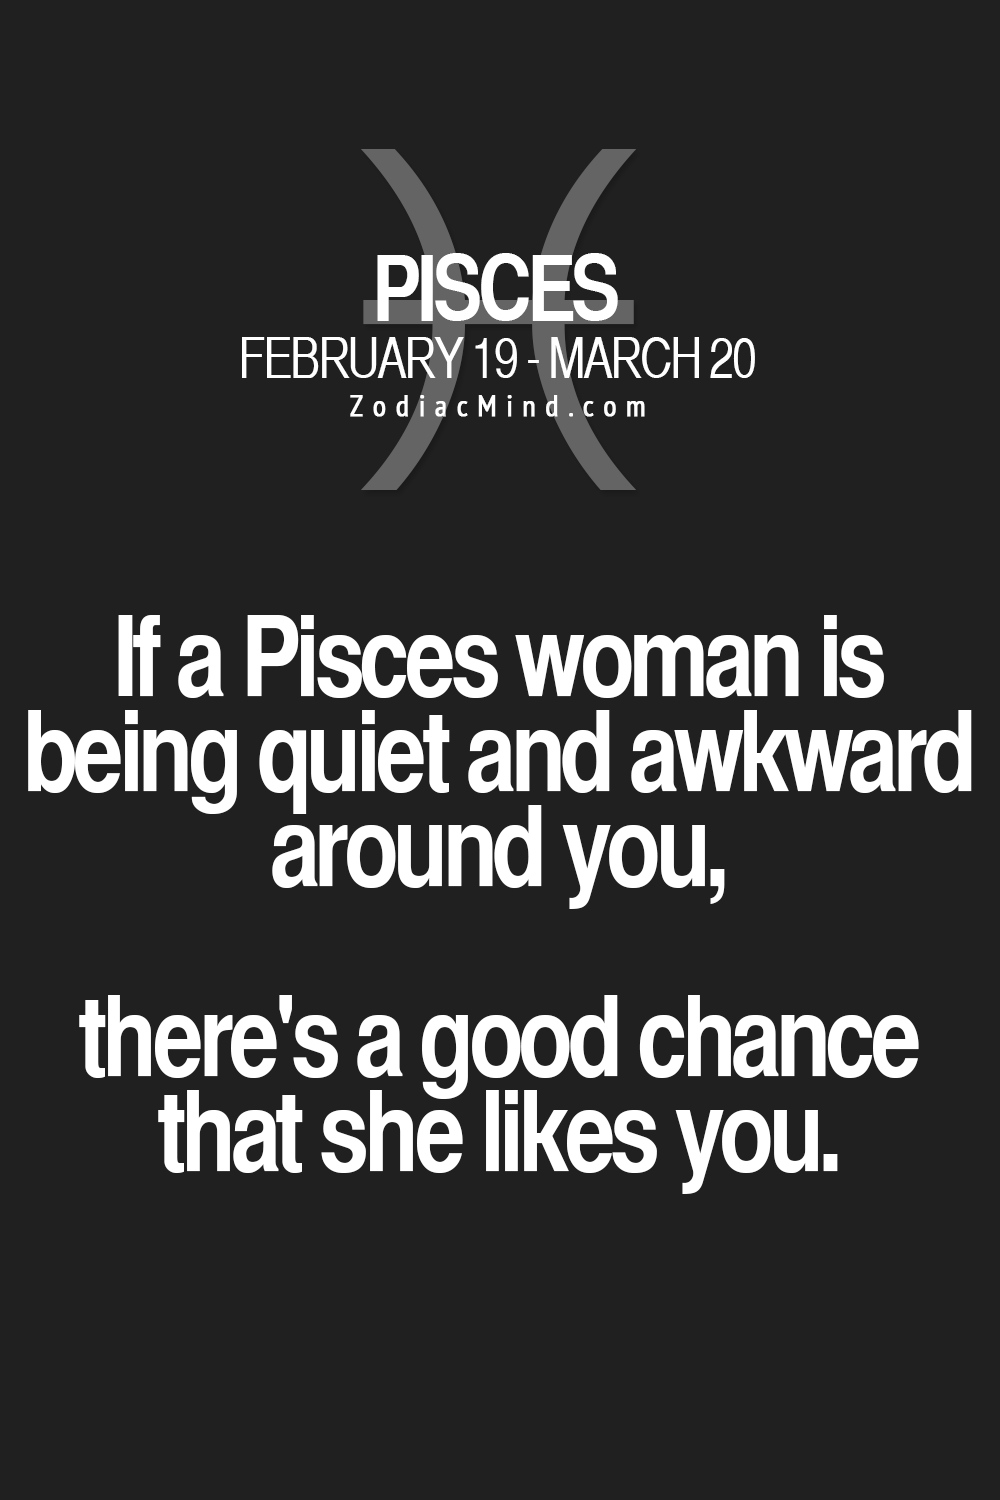 When a pisces woman likes you